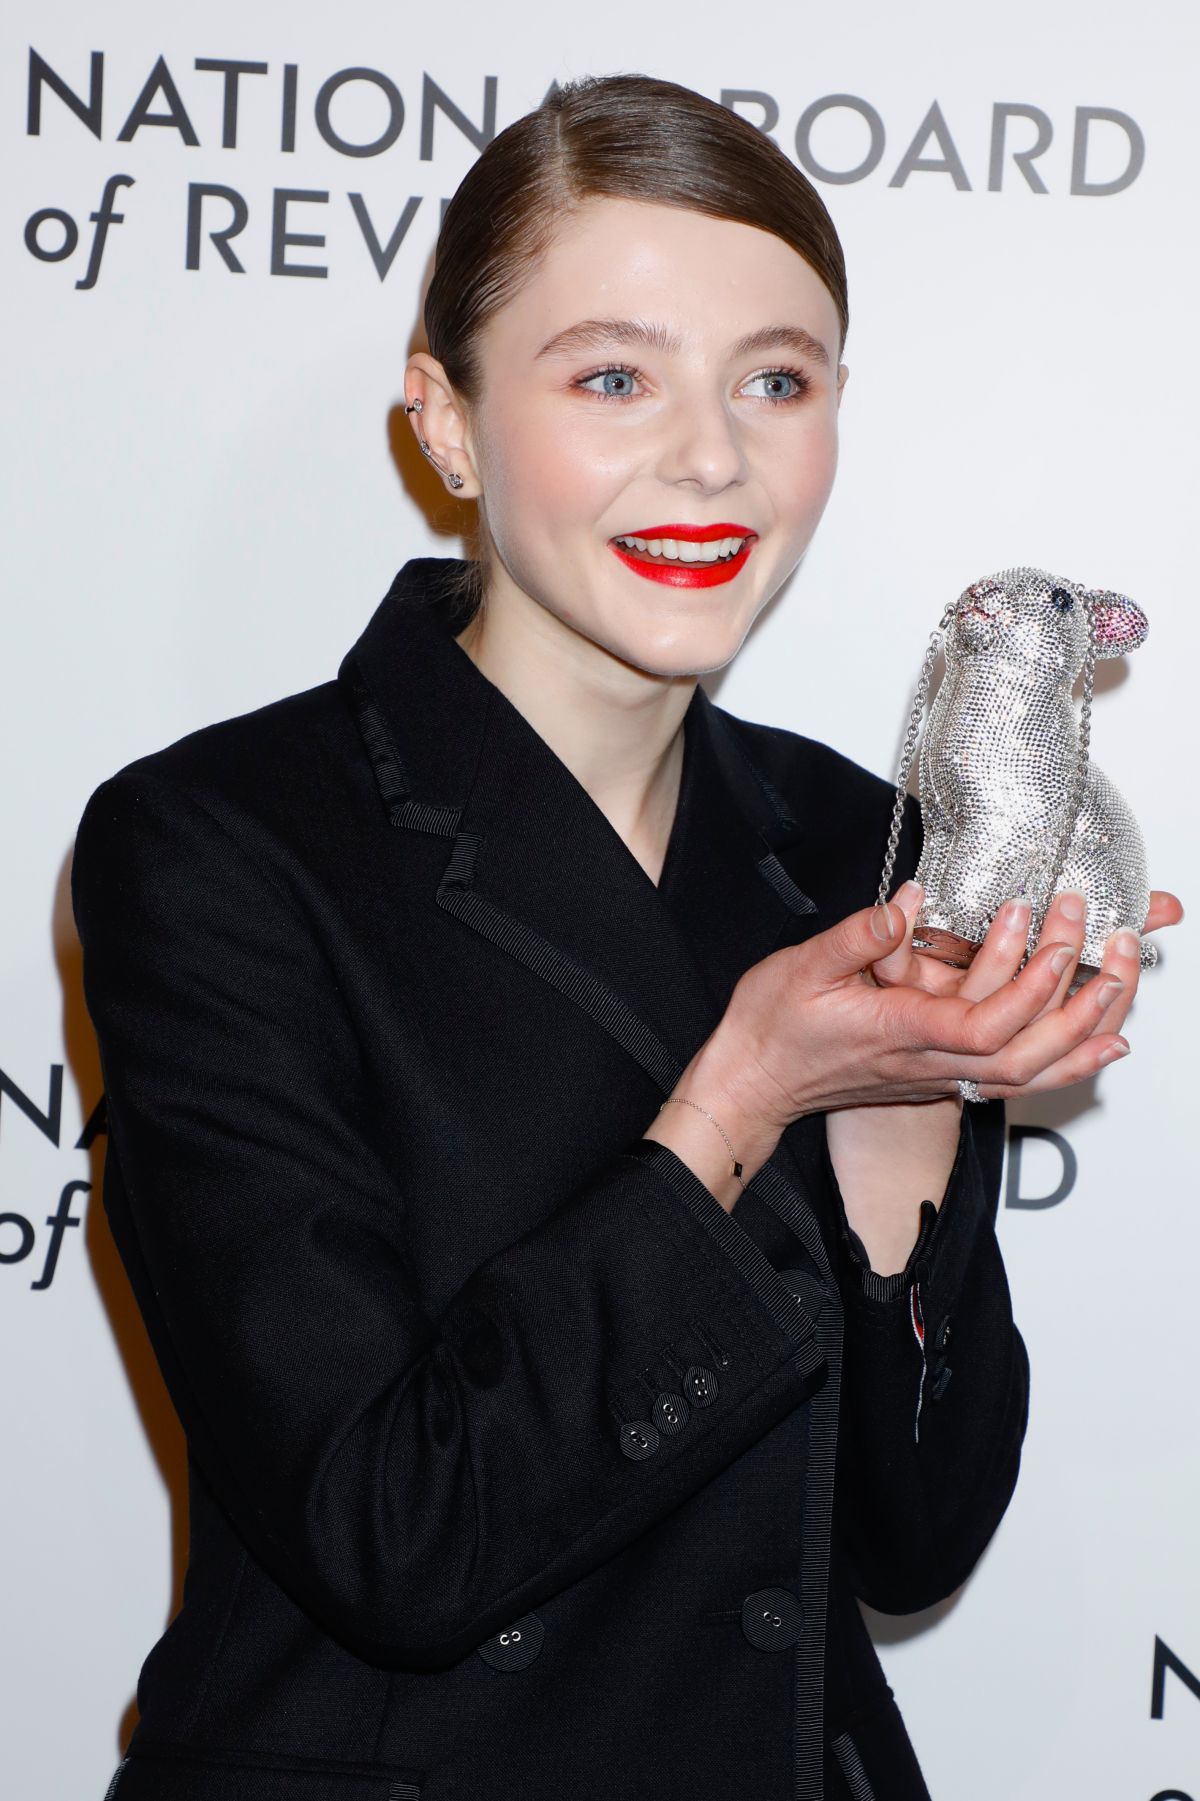 THOMASIN MCKENZIE at National Board of Review Awards Gala in New York 01/08/2019 ...1200 x 1801